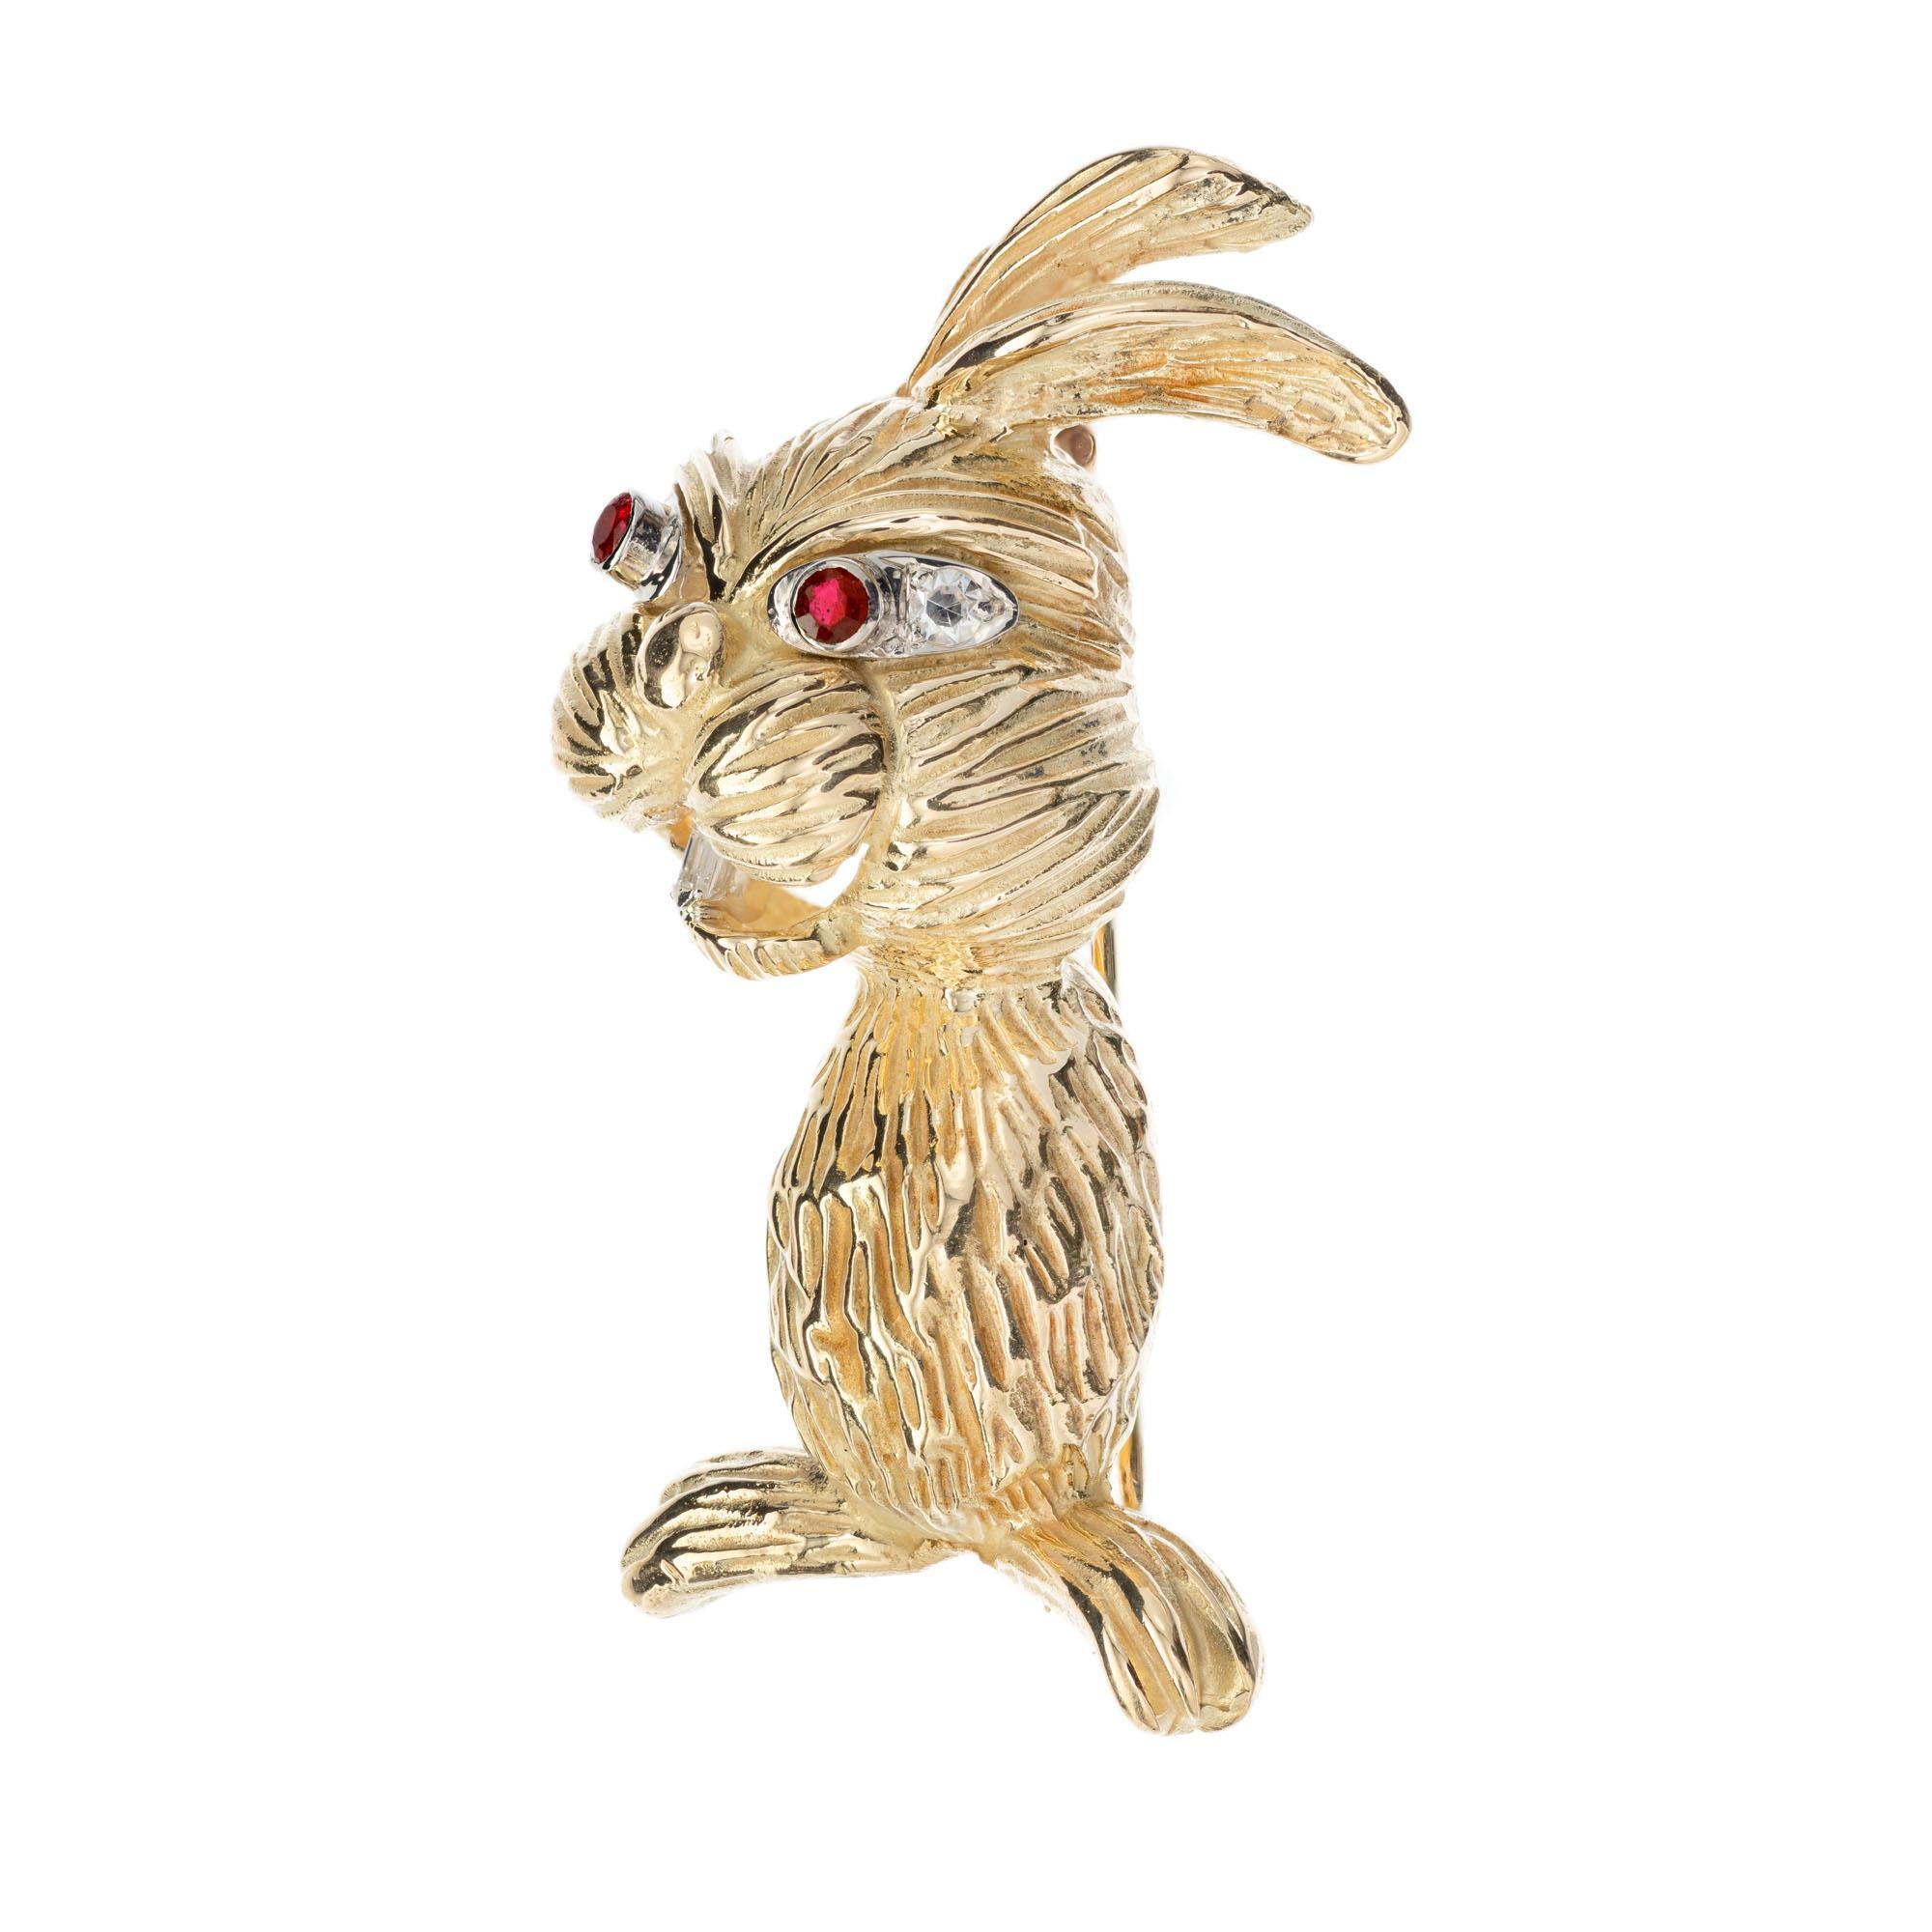 Vintage 1960's solid 18k yellow gold rabbit pin with with ruby eyes and diamond tooth and accents. Solid textured 18k yellow gold 

2 round red rubies, approx. .8cts
2 round single cut diamonds, G VS .6cts
1 step cut baguette, G VS approx. .5cts
18k